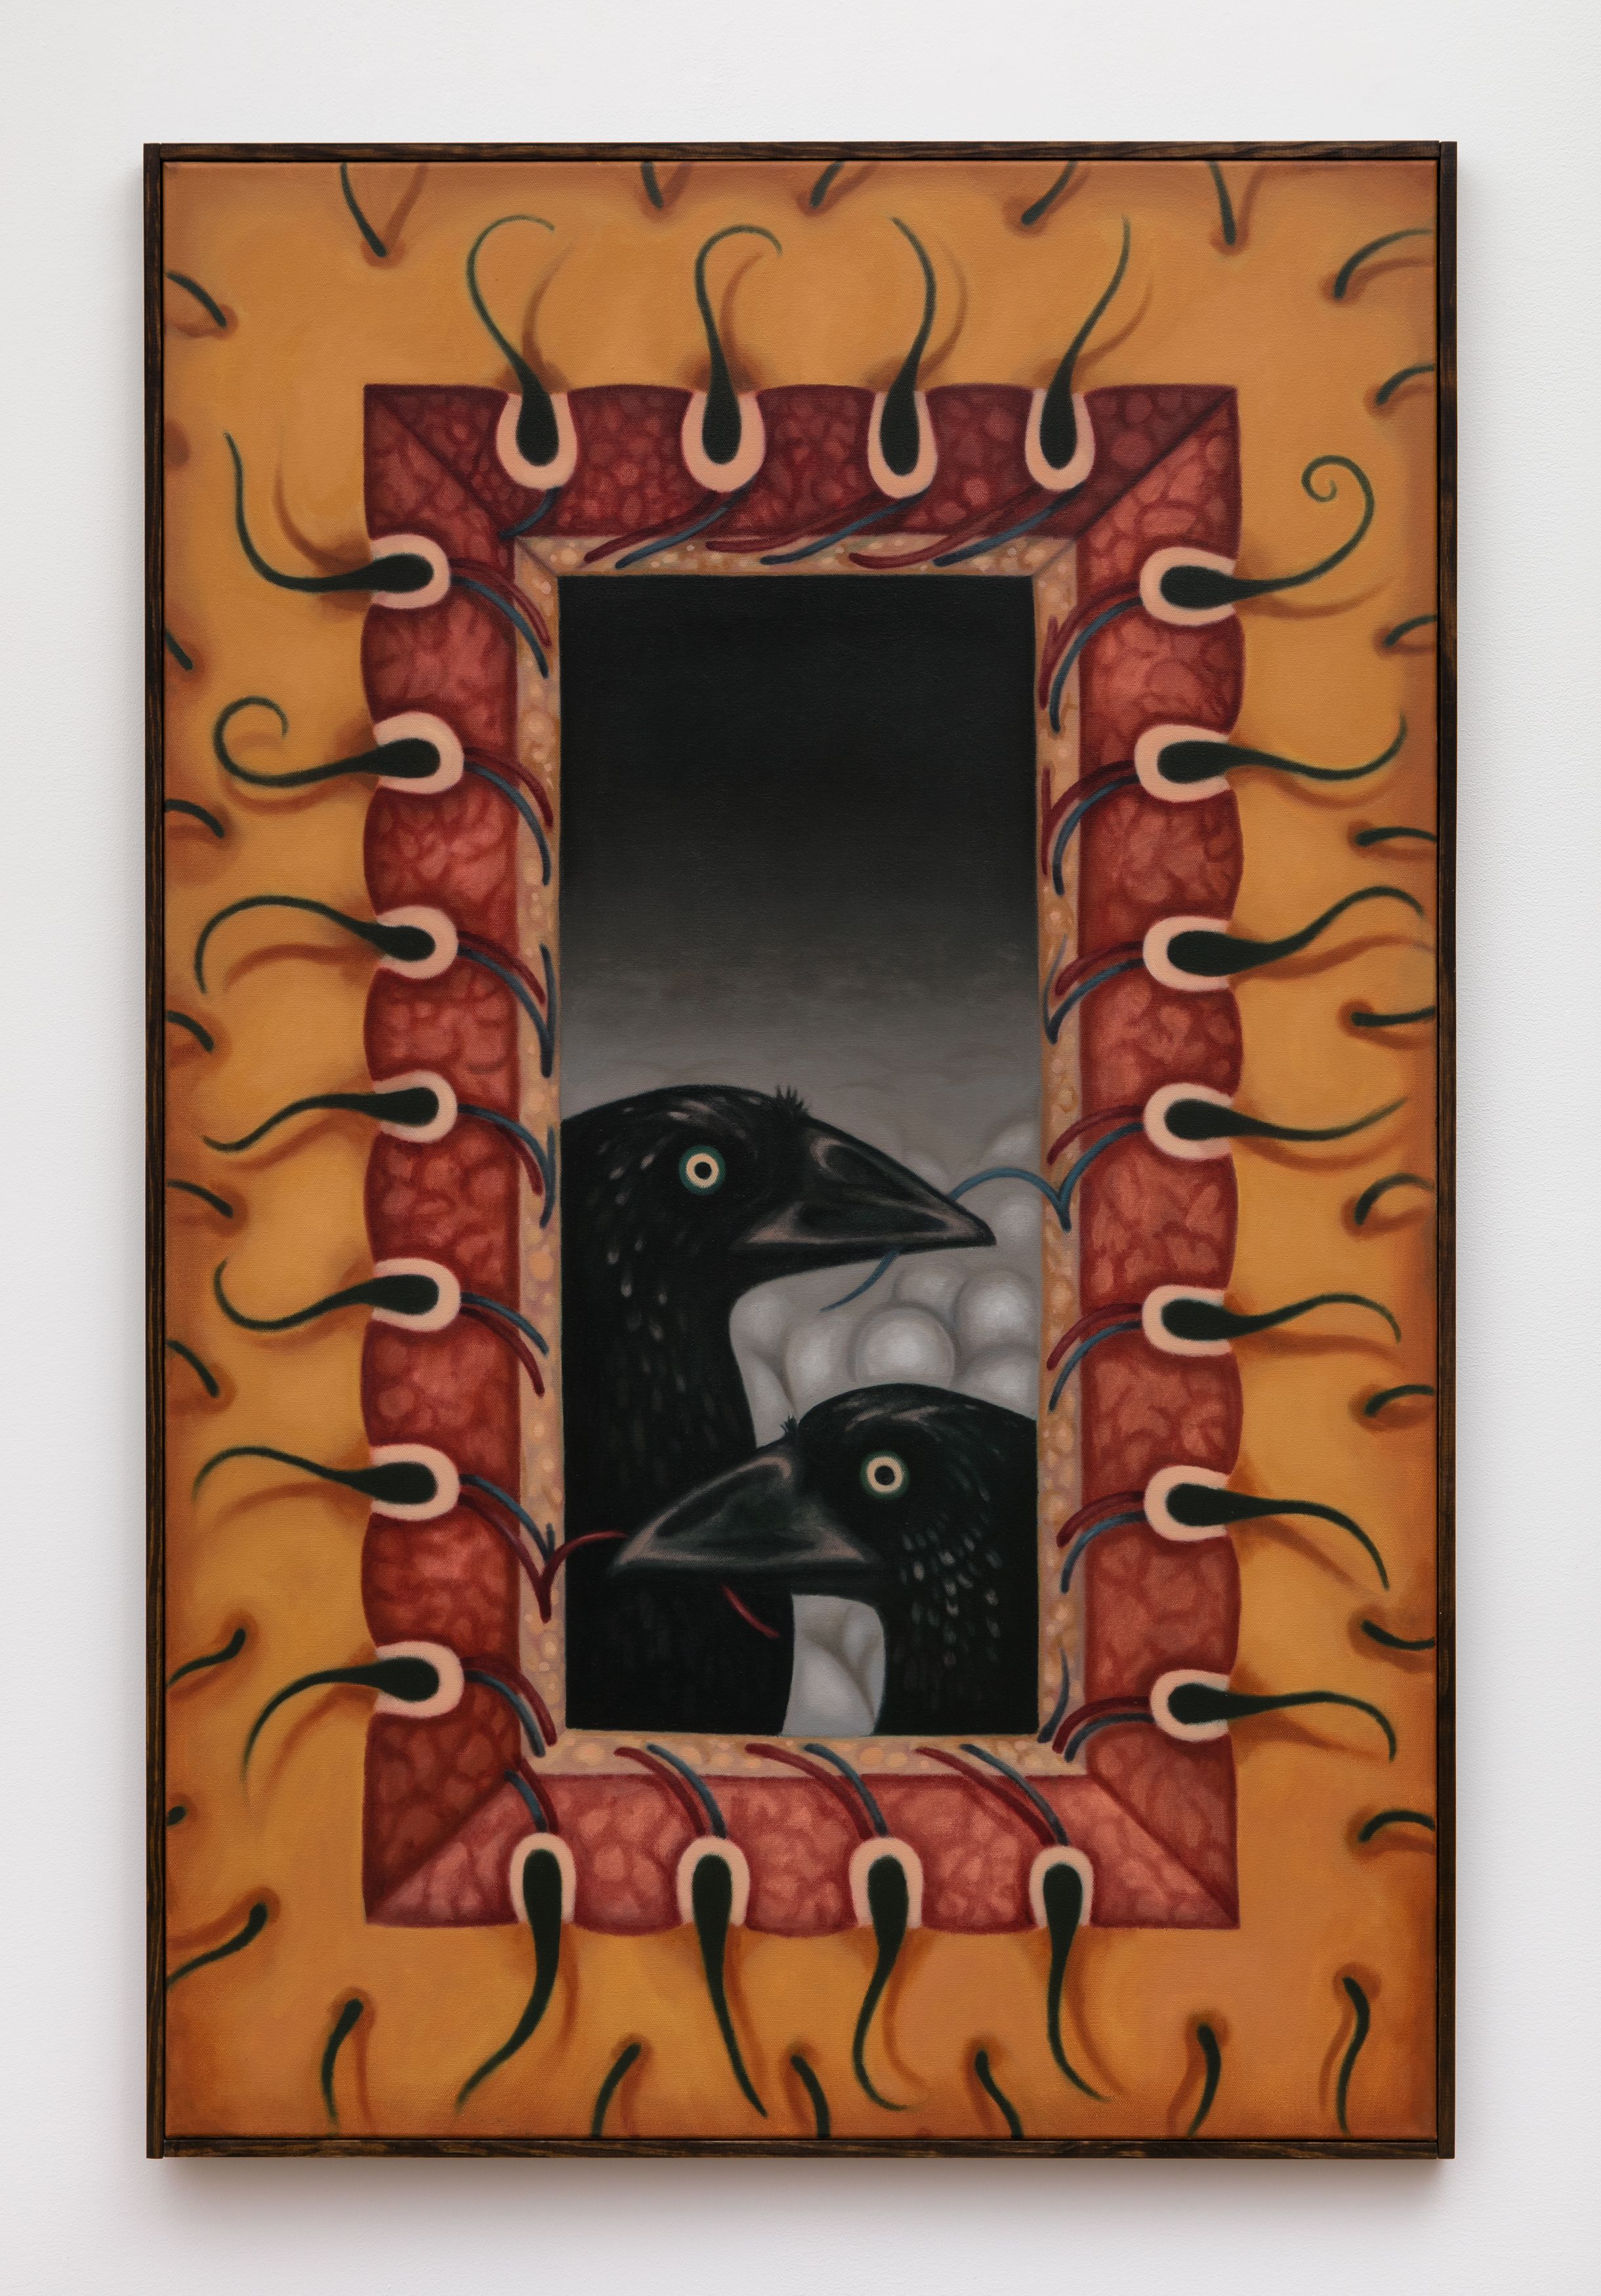 Justin Fitzpatrick, Phobic Interior, 2019, oil on canvas, wooden frame, 56 1⁄4 x 36 5⁄8 x 1 3⁄8 in. (143 x 93 x 3.5 cm)